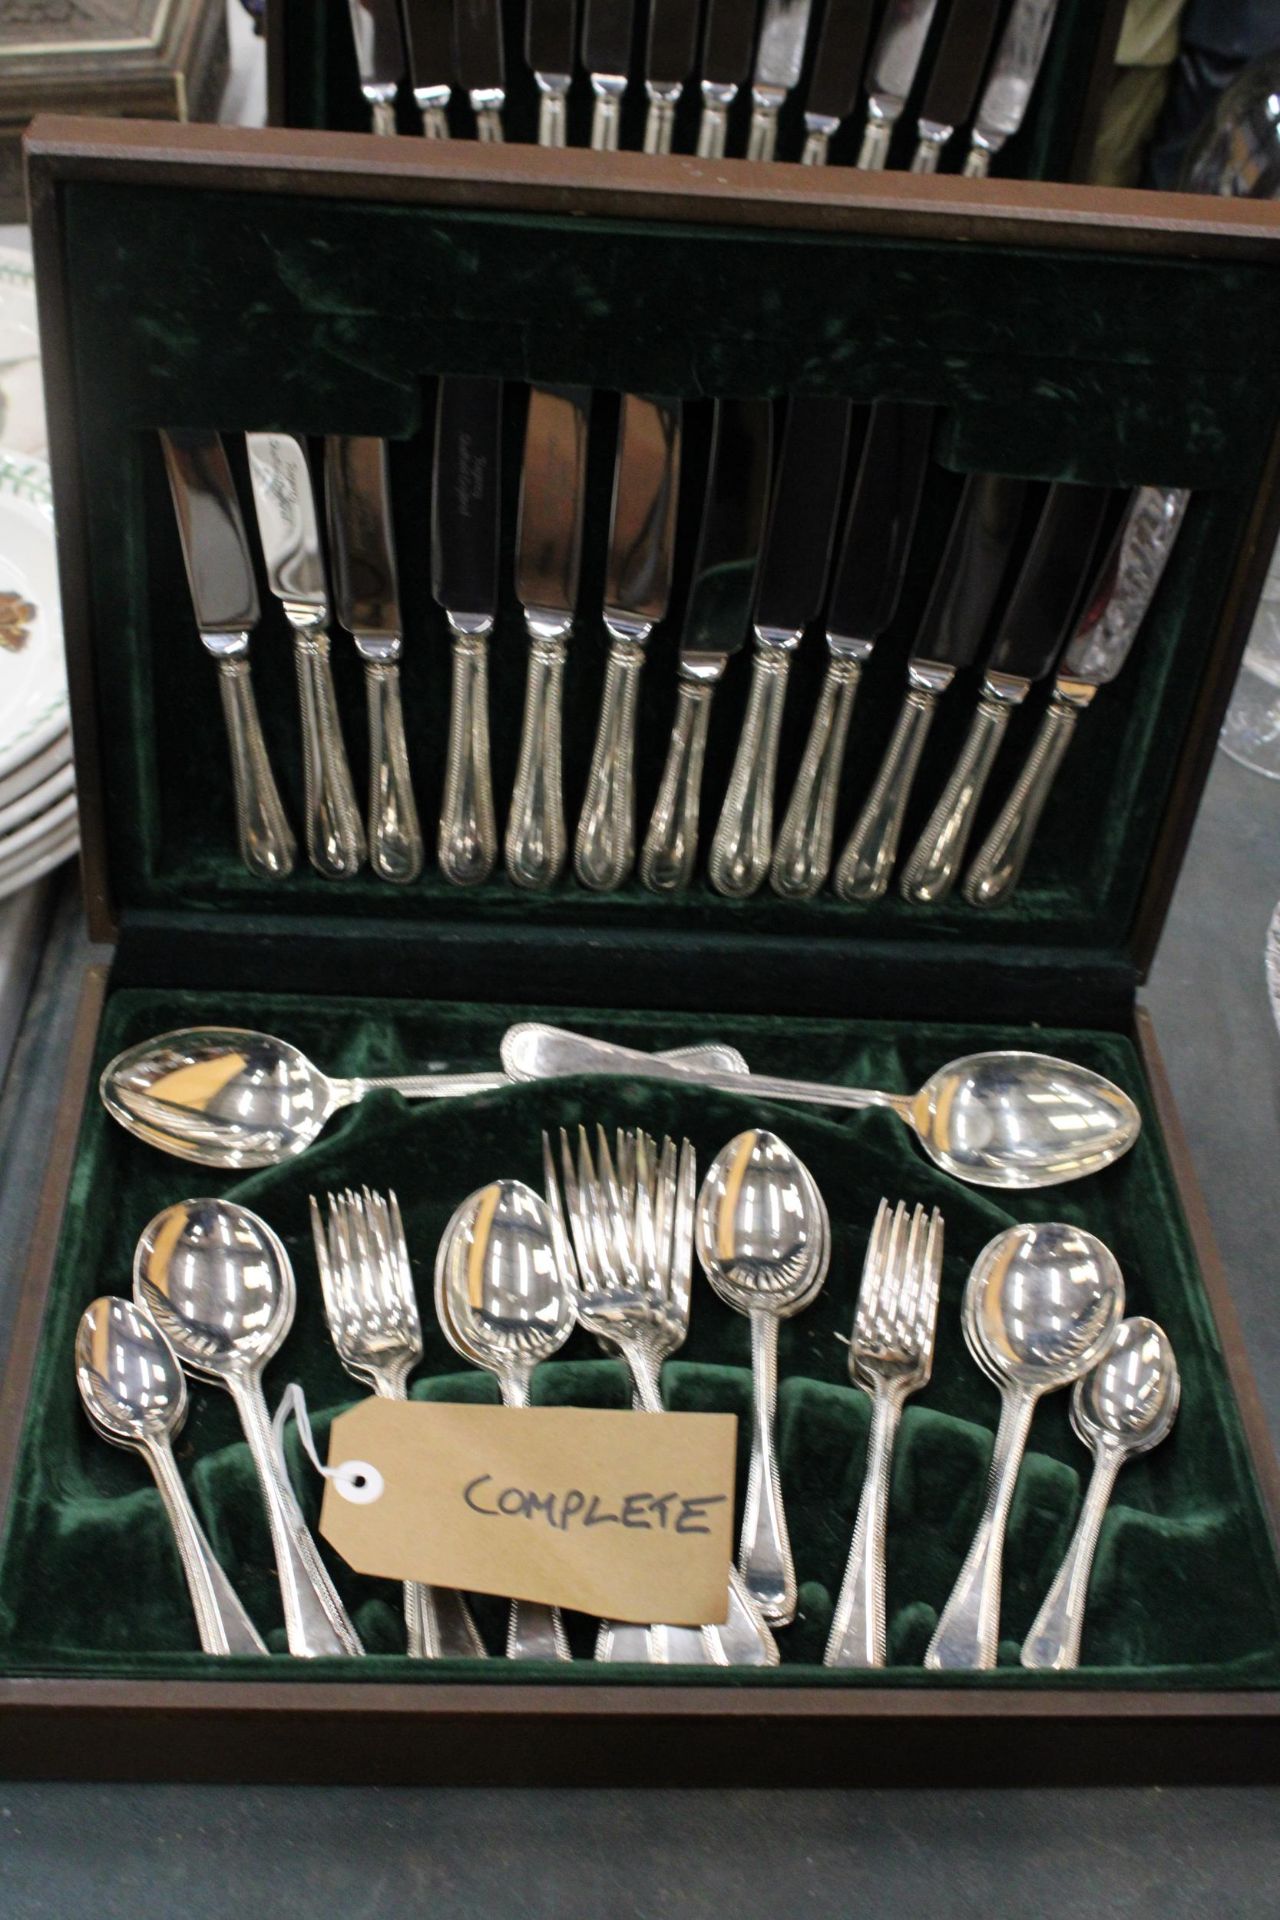 TWO CASED CANTEENS OF CUTLERY, ONE IS COMPLETE, THE OTHER HAS THREE TEASPOONS MISSING - Bild 2 aus 8